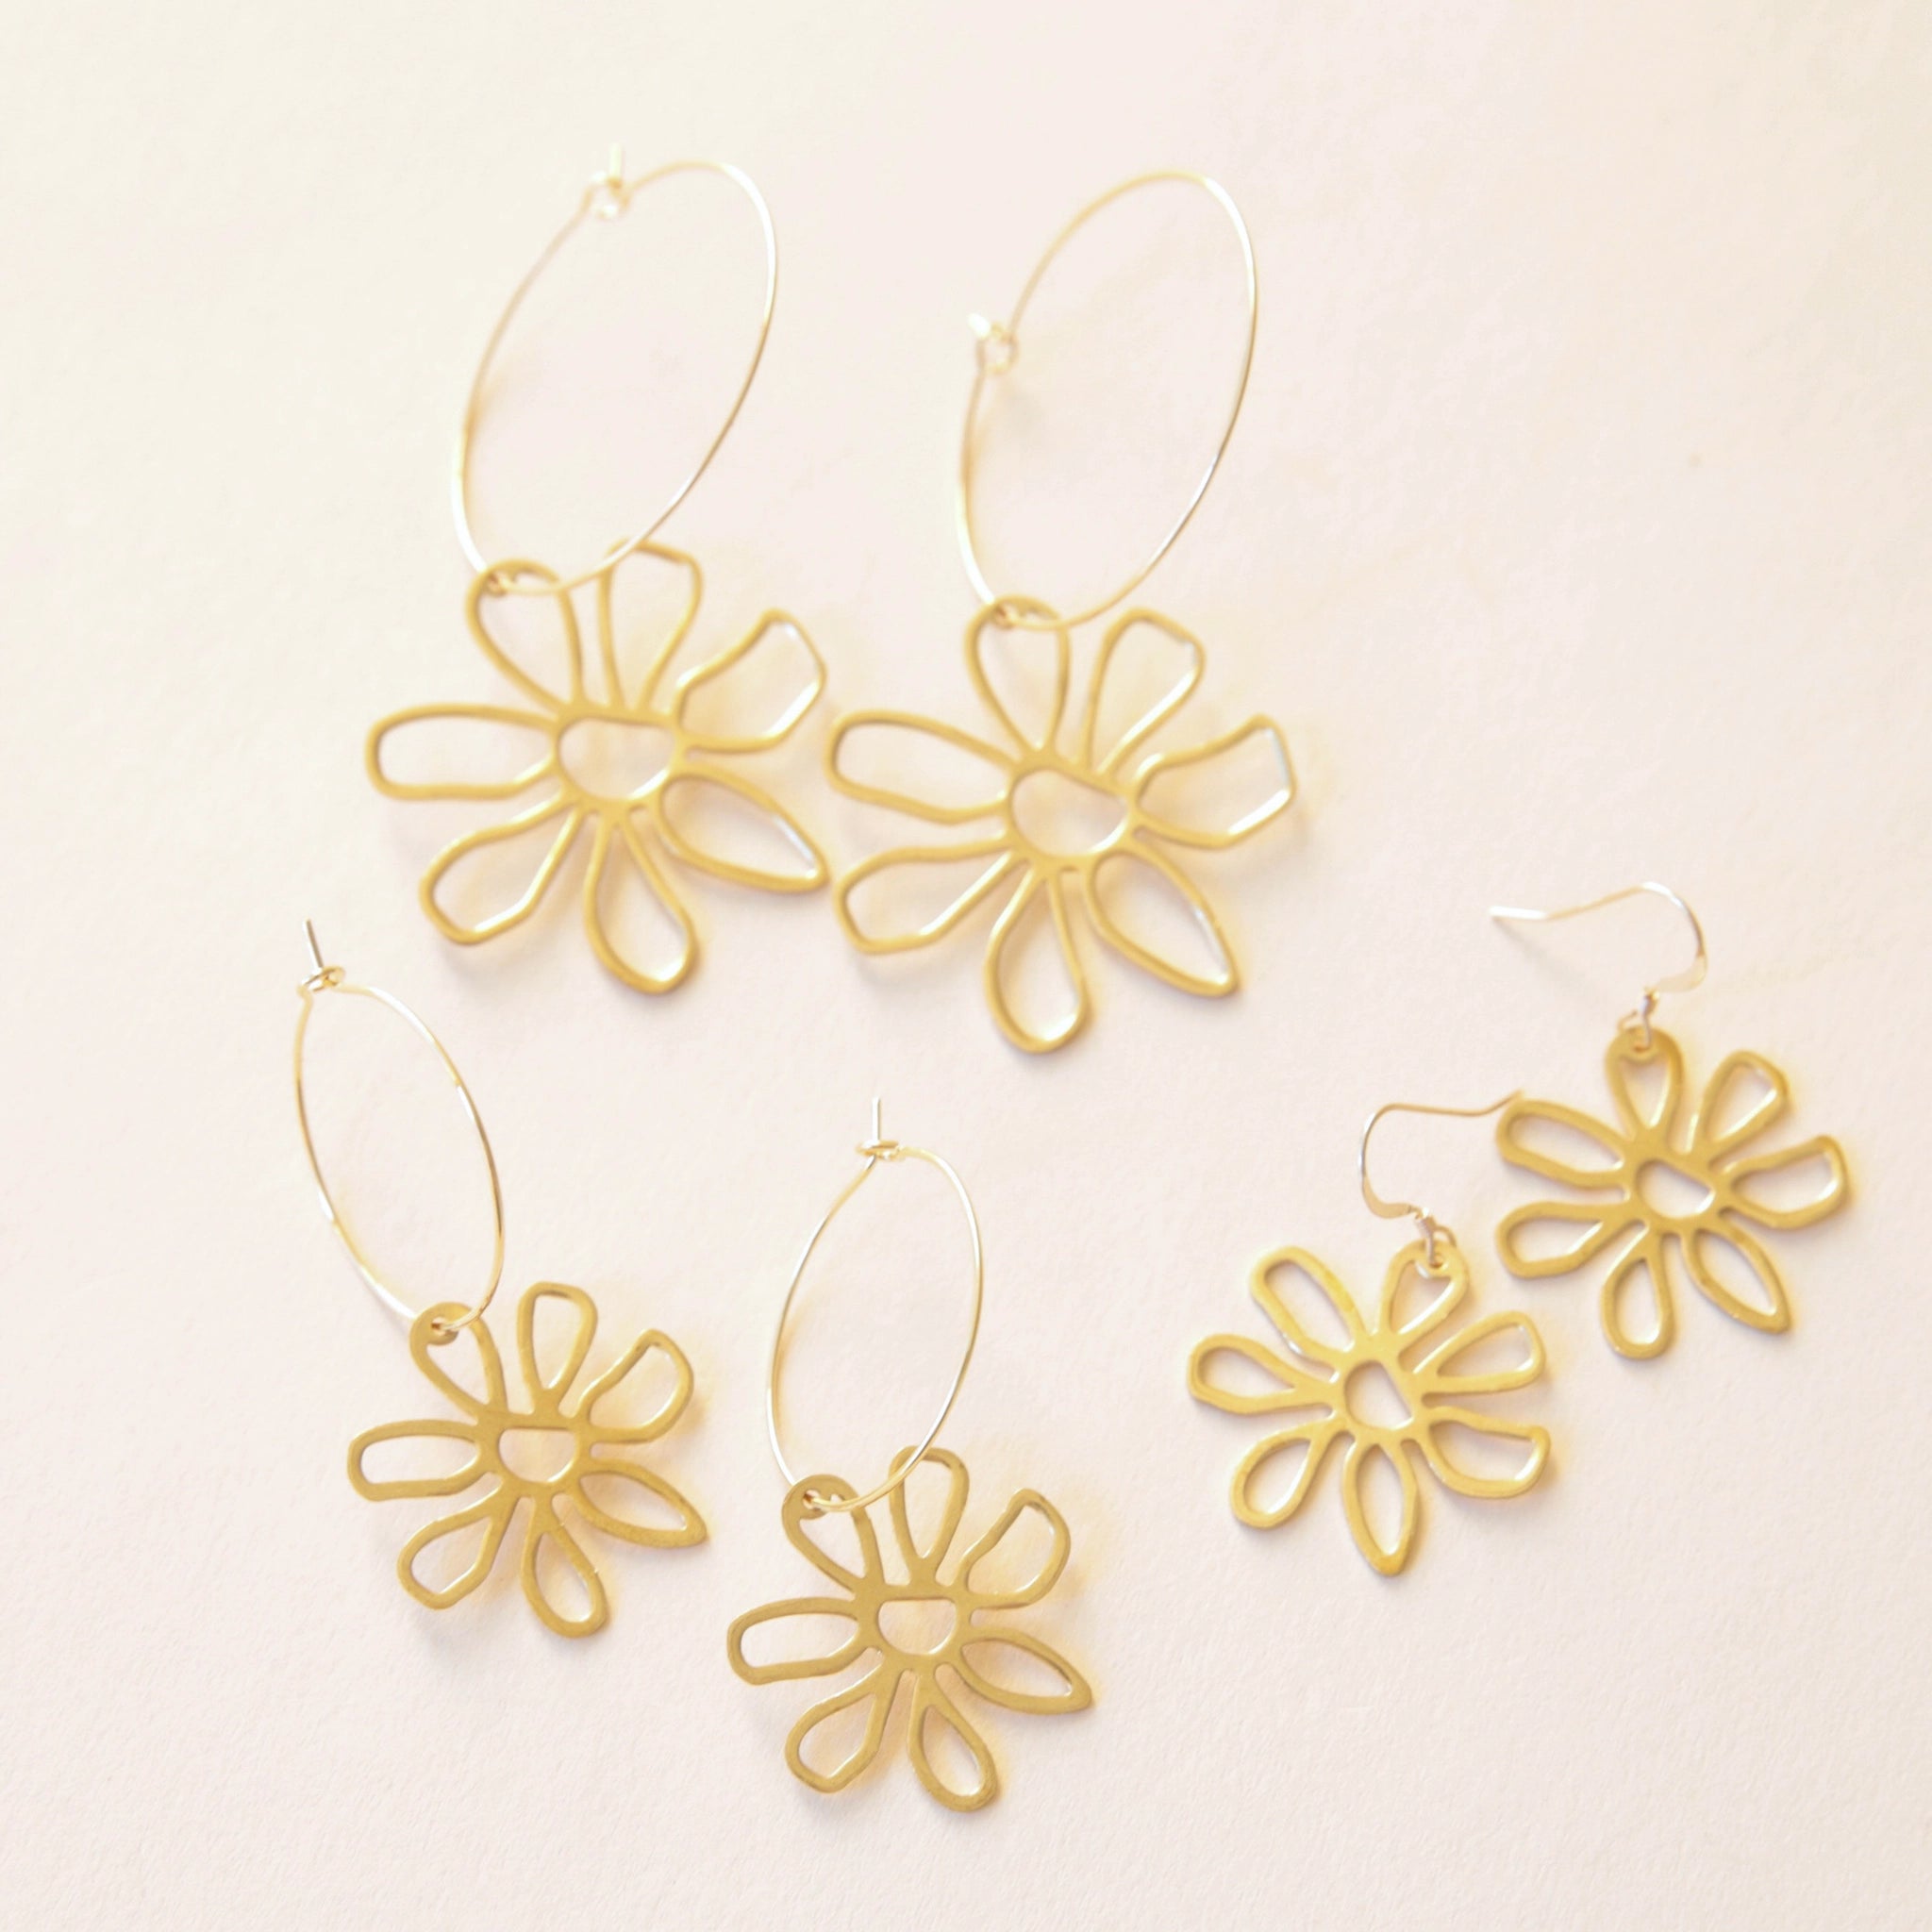 On a cream background is three different pairs of earrings, two different sized pairs of hoops and gold flower charms hanging off the bottom and a pair that has a gold hook earring with the same gold flower charm attached to that. 